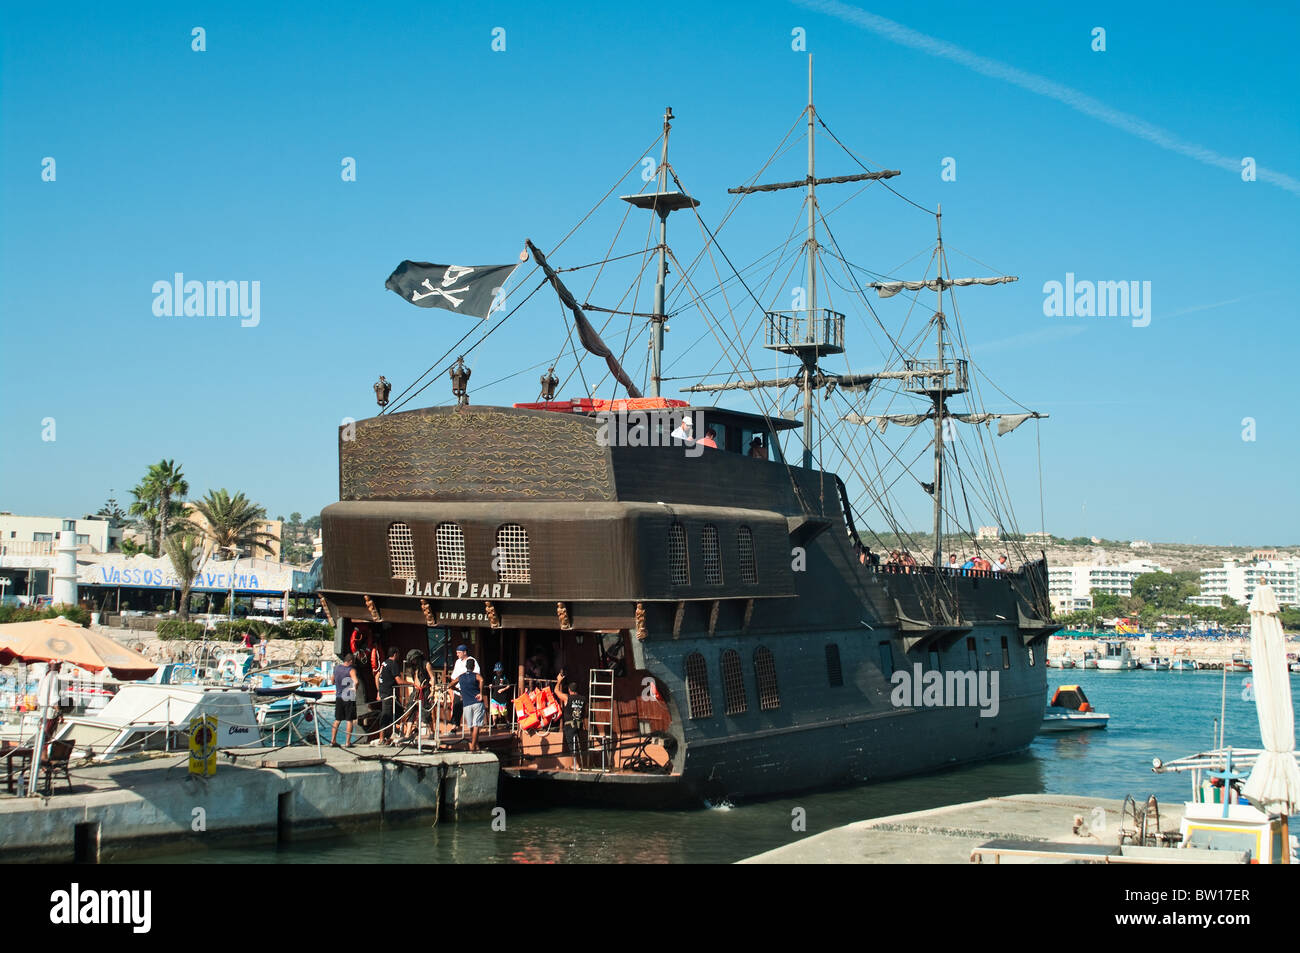 Ship the Black Pearl from film the Pirates of the Caribbean in Agia-Napa, Cyprus harbor. Mediterranean, Cyprus, Europe Stock Photo